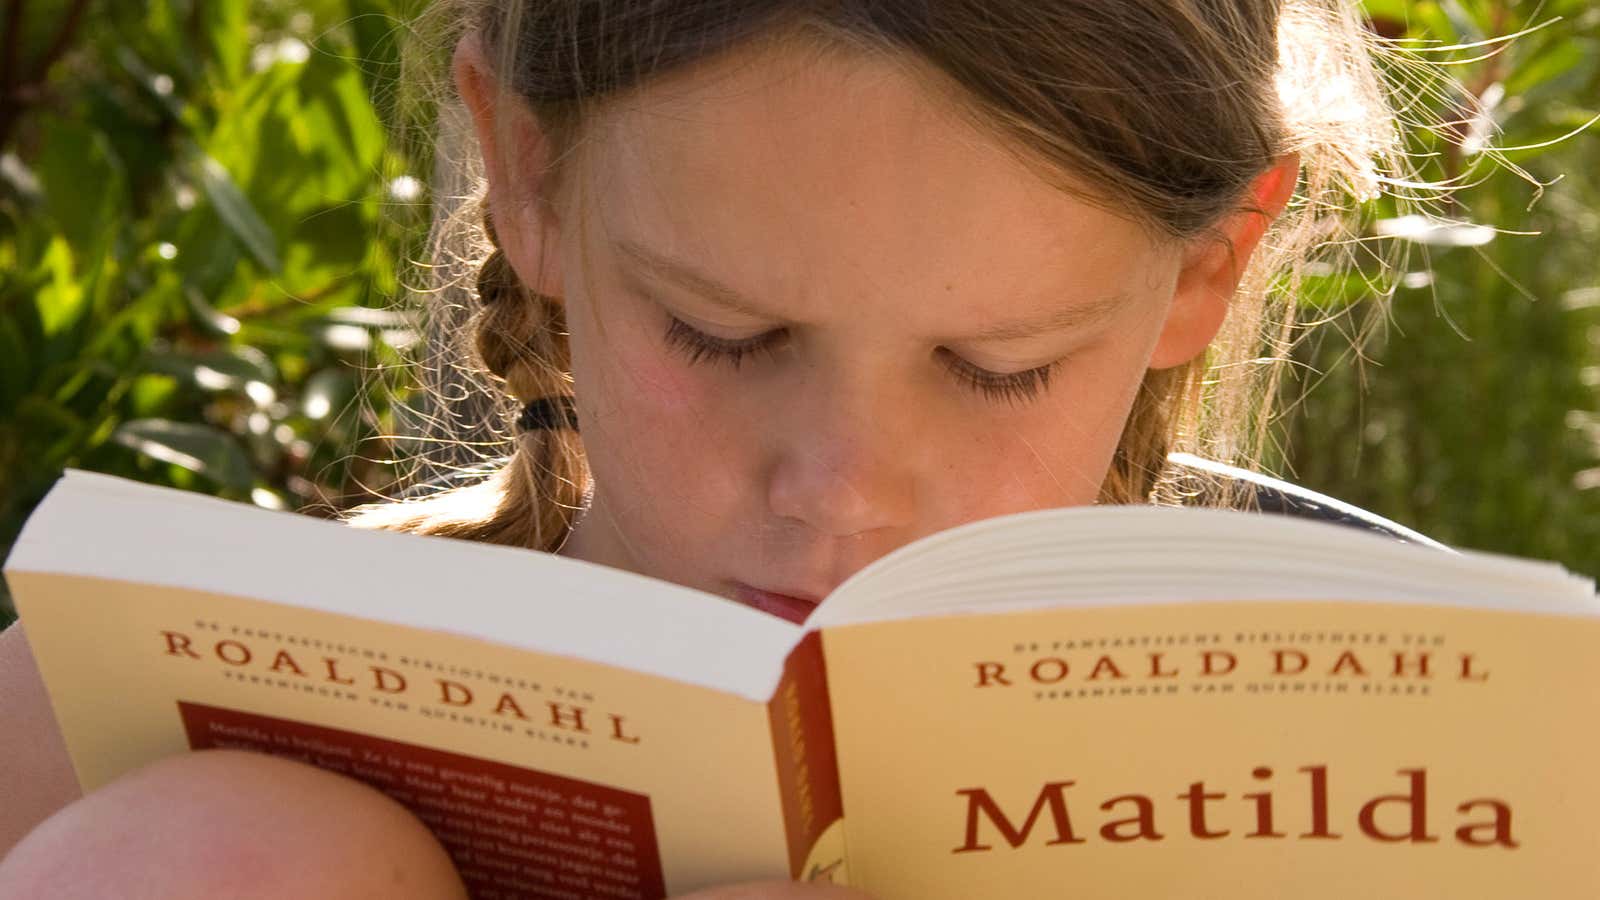 “These books gave Matilda a hopeful and comforting message: You are not alone.”